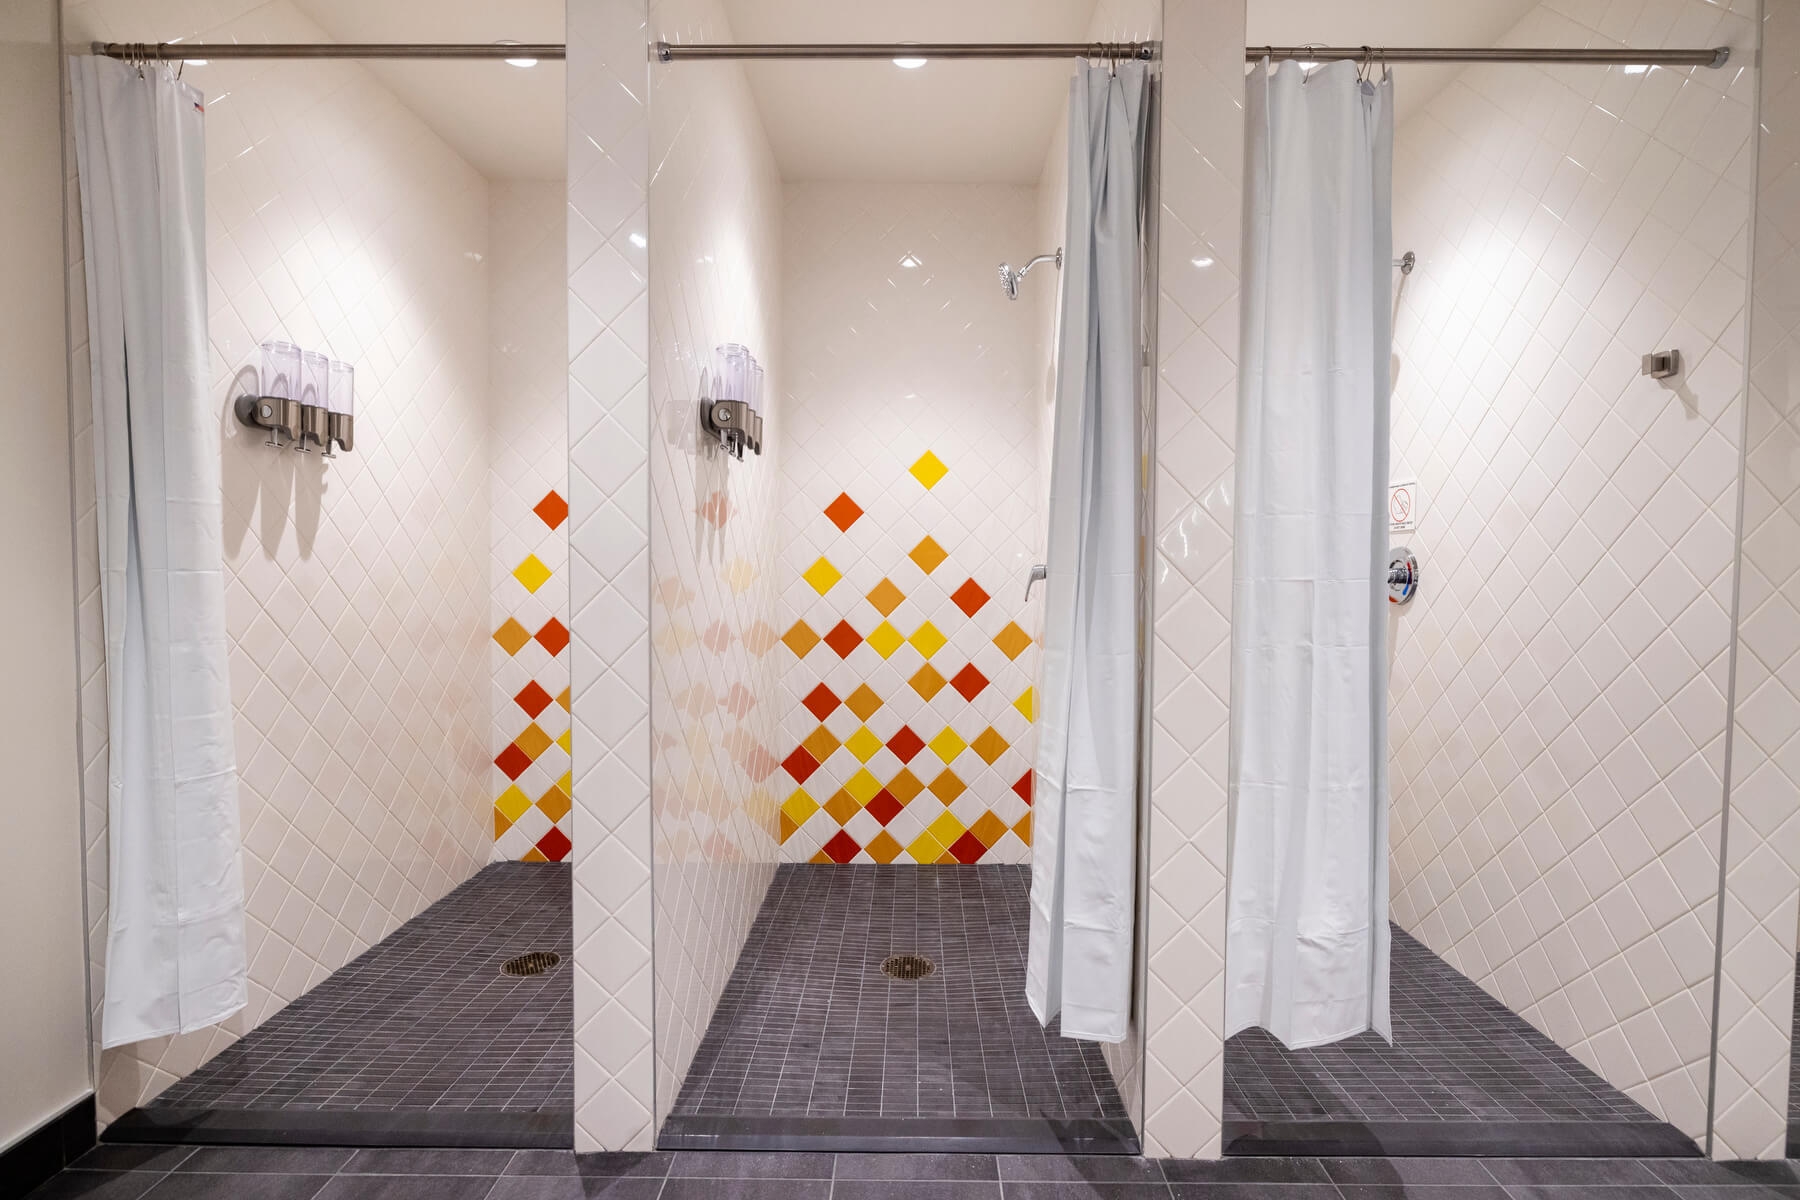 An image of empty shower stalls inside the empty locker room at Amazon's HQ2